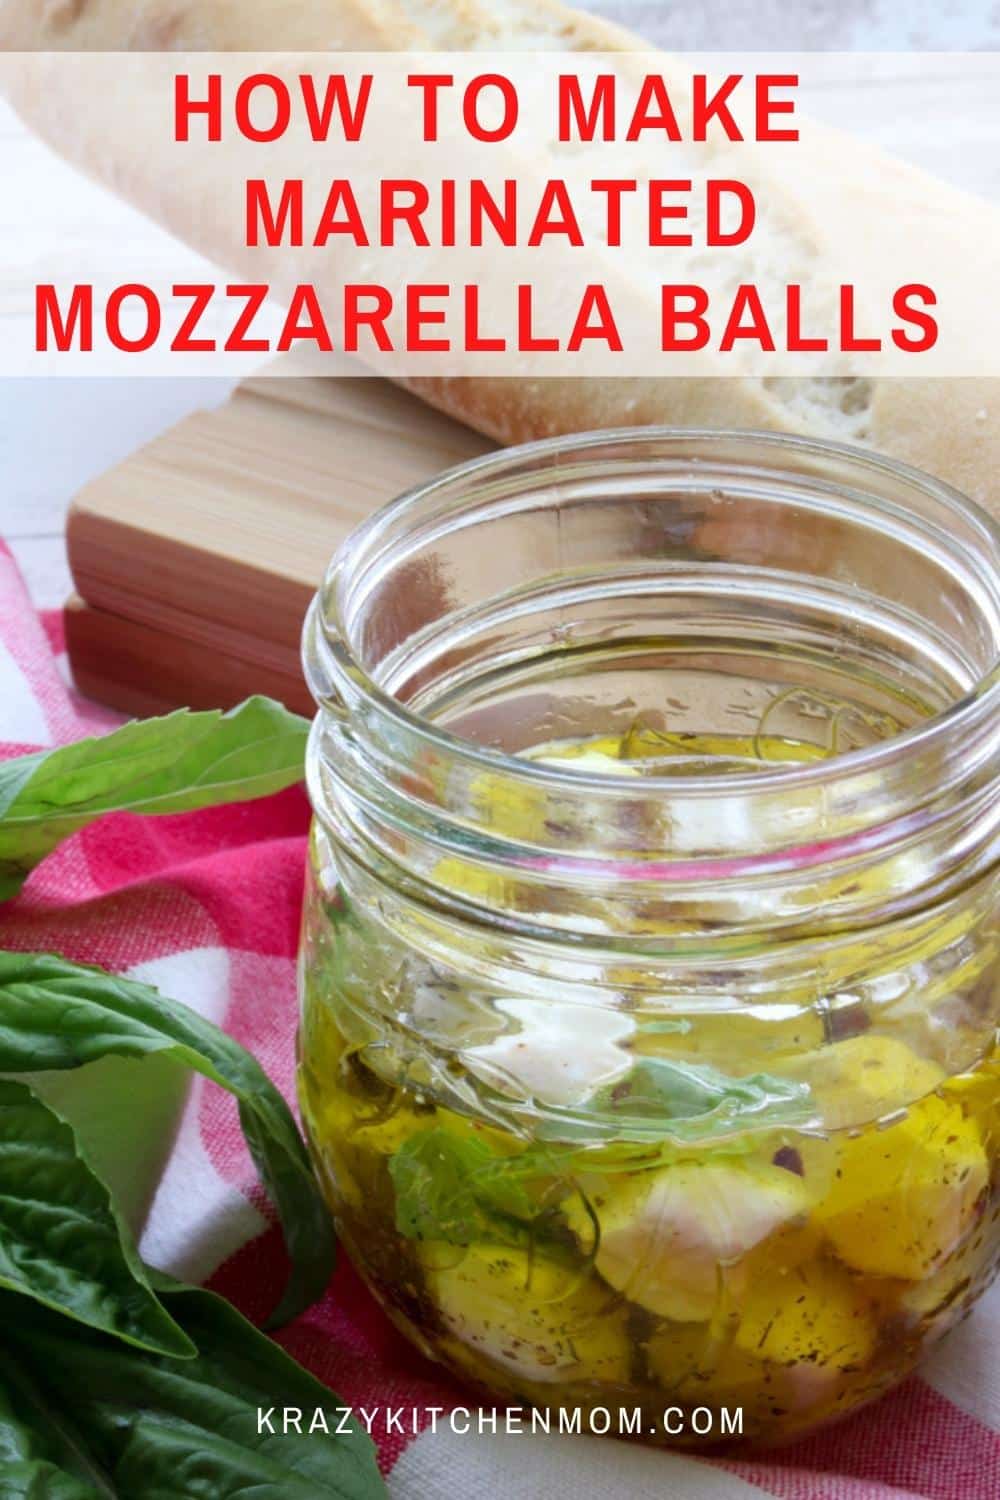 Turn plain mozzarella pearls into herby savory bites of cheese with an explosion of flavor. Perfect as a snack or on pizza and salads. via @krazykitchenmom